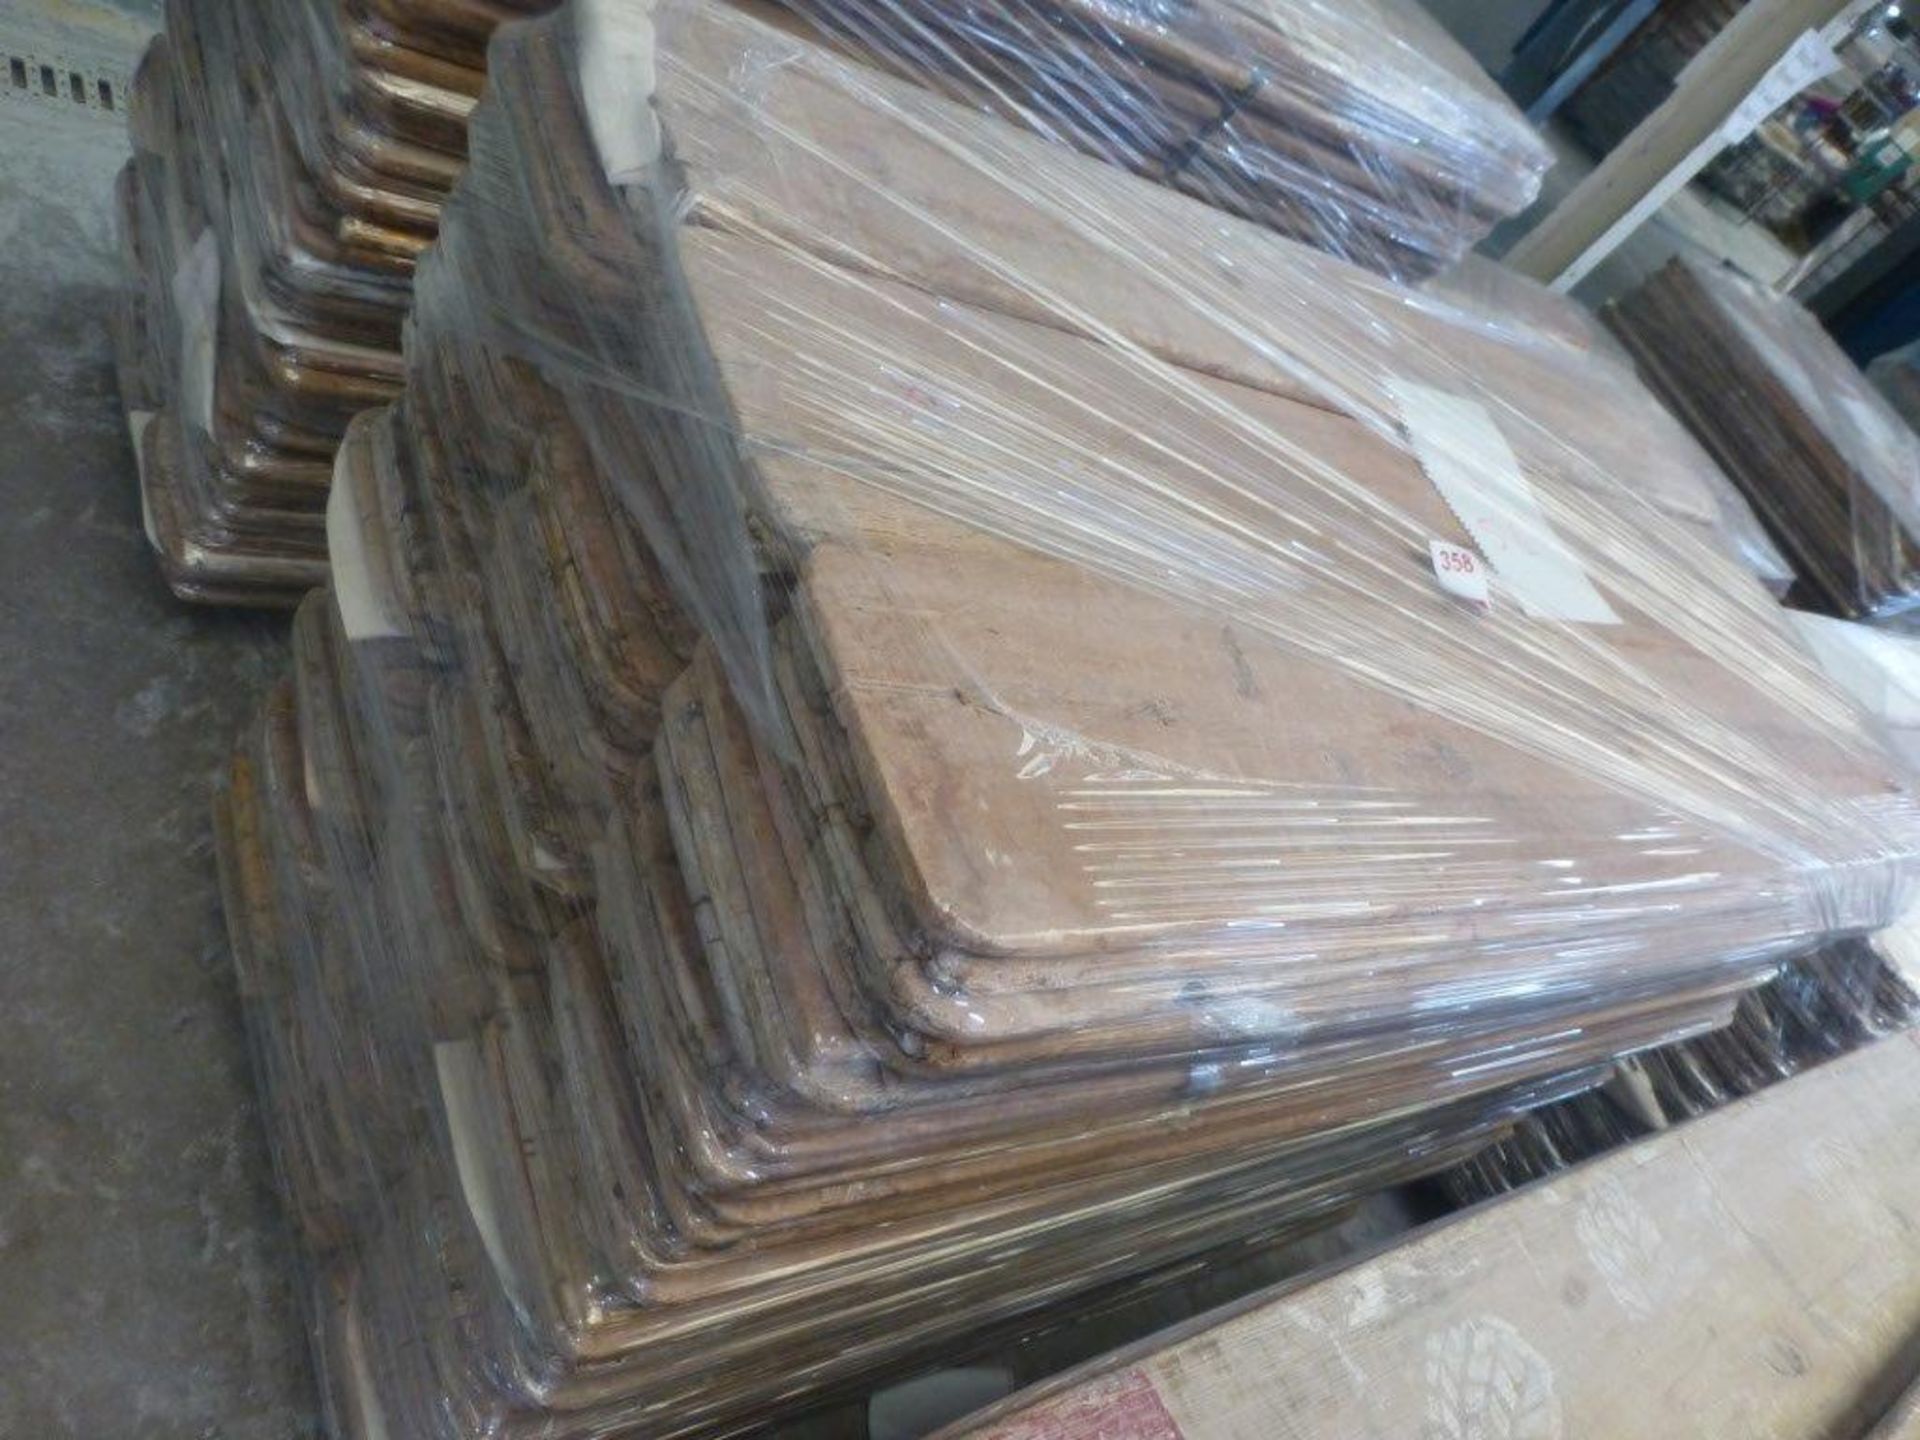 141 x 5' 4" ware boards on one pallet